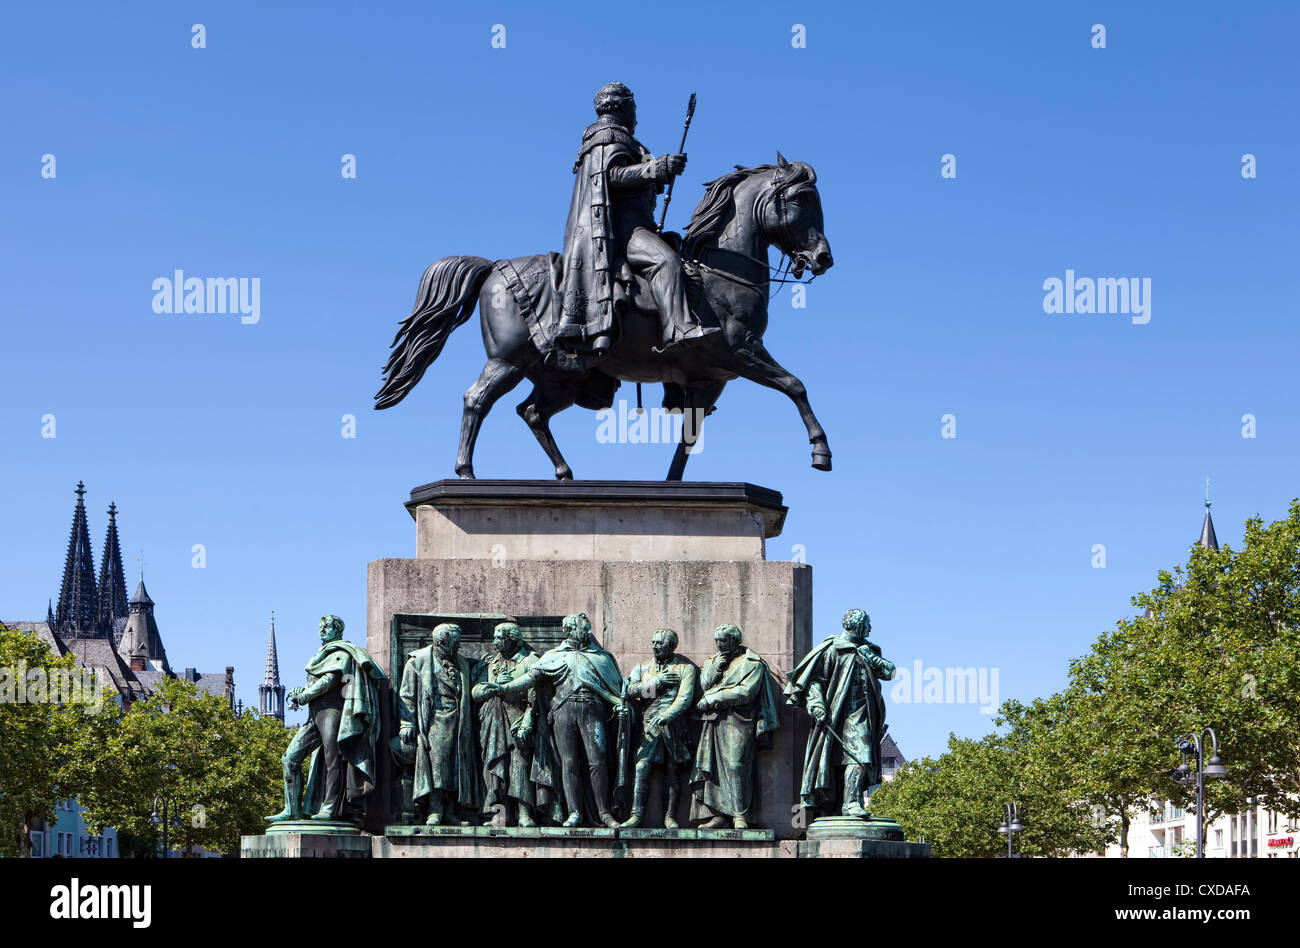 Equestrian statue for the Prussian King Friedrich Wilhelm III, Heumarkt square, Cologne, North Rhine-Westphalia, Germany, Europe Stock Photo